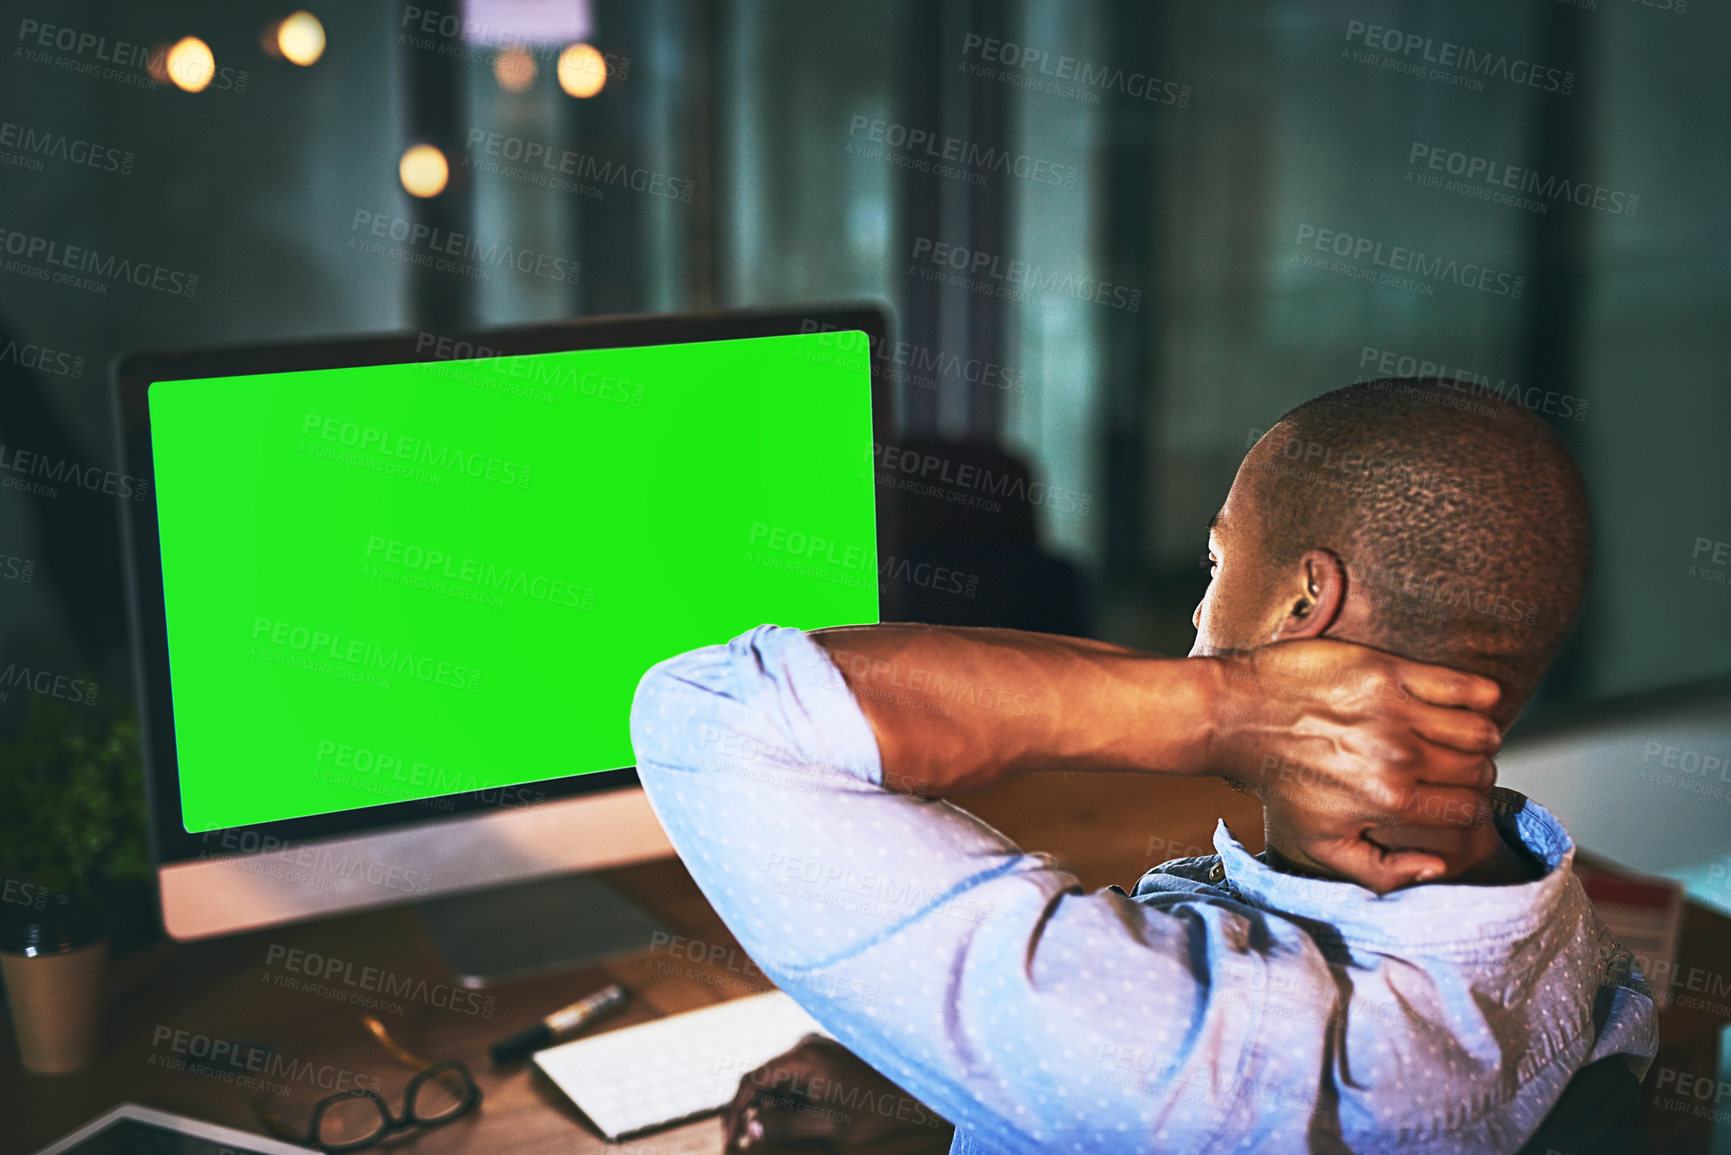 Buy stock photo Shot of a young businessman experiencing tension while using a computer with a green screen late at work